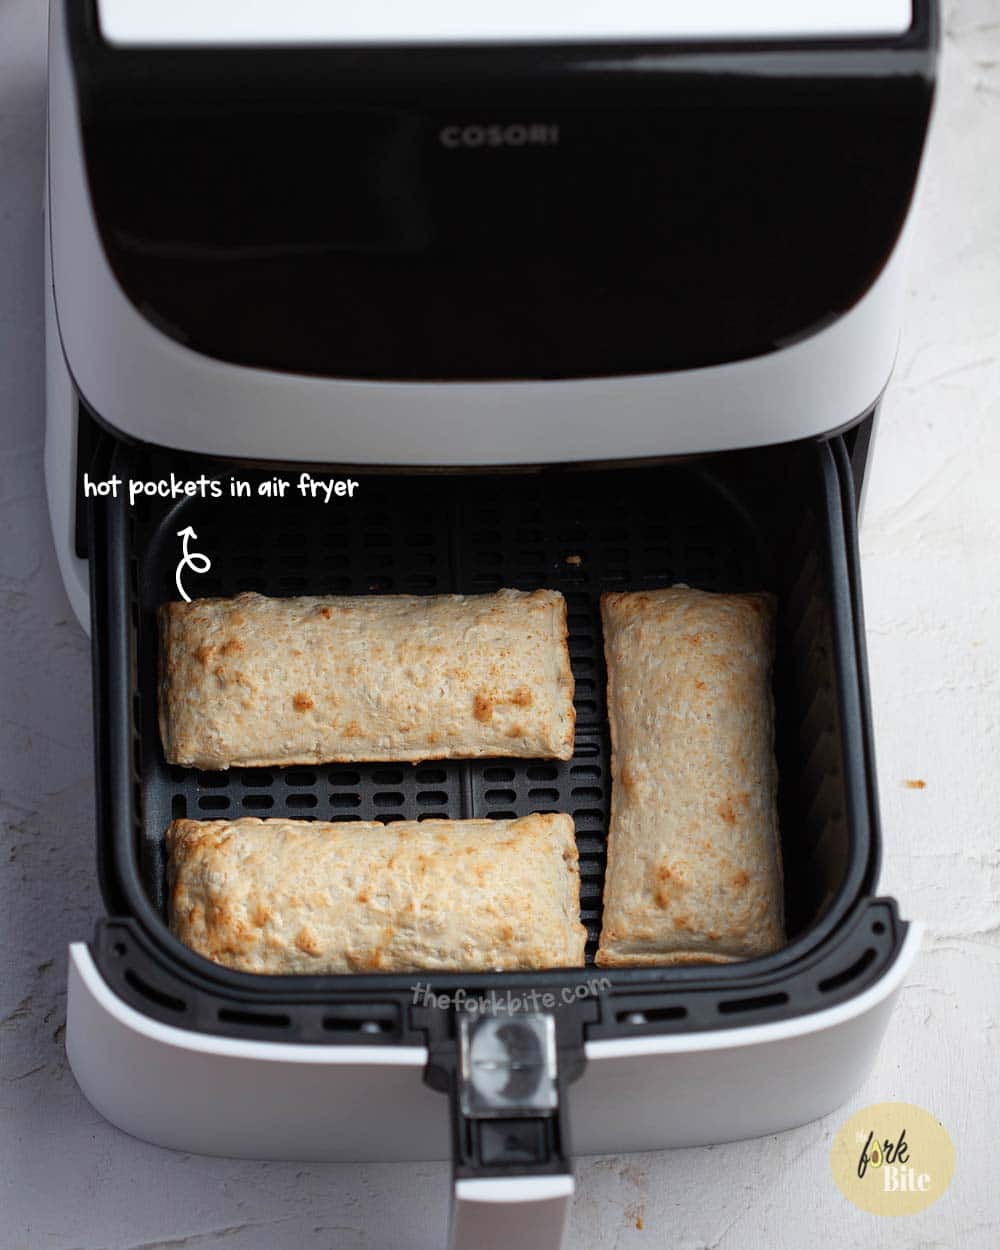 how long do i cook a hot pocket in the air fryer 7.6.20